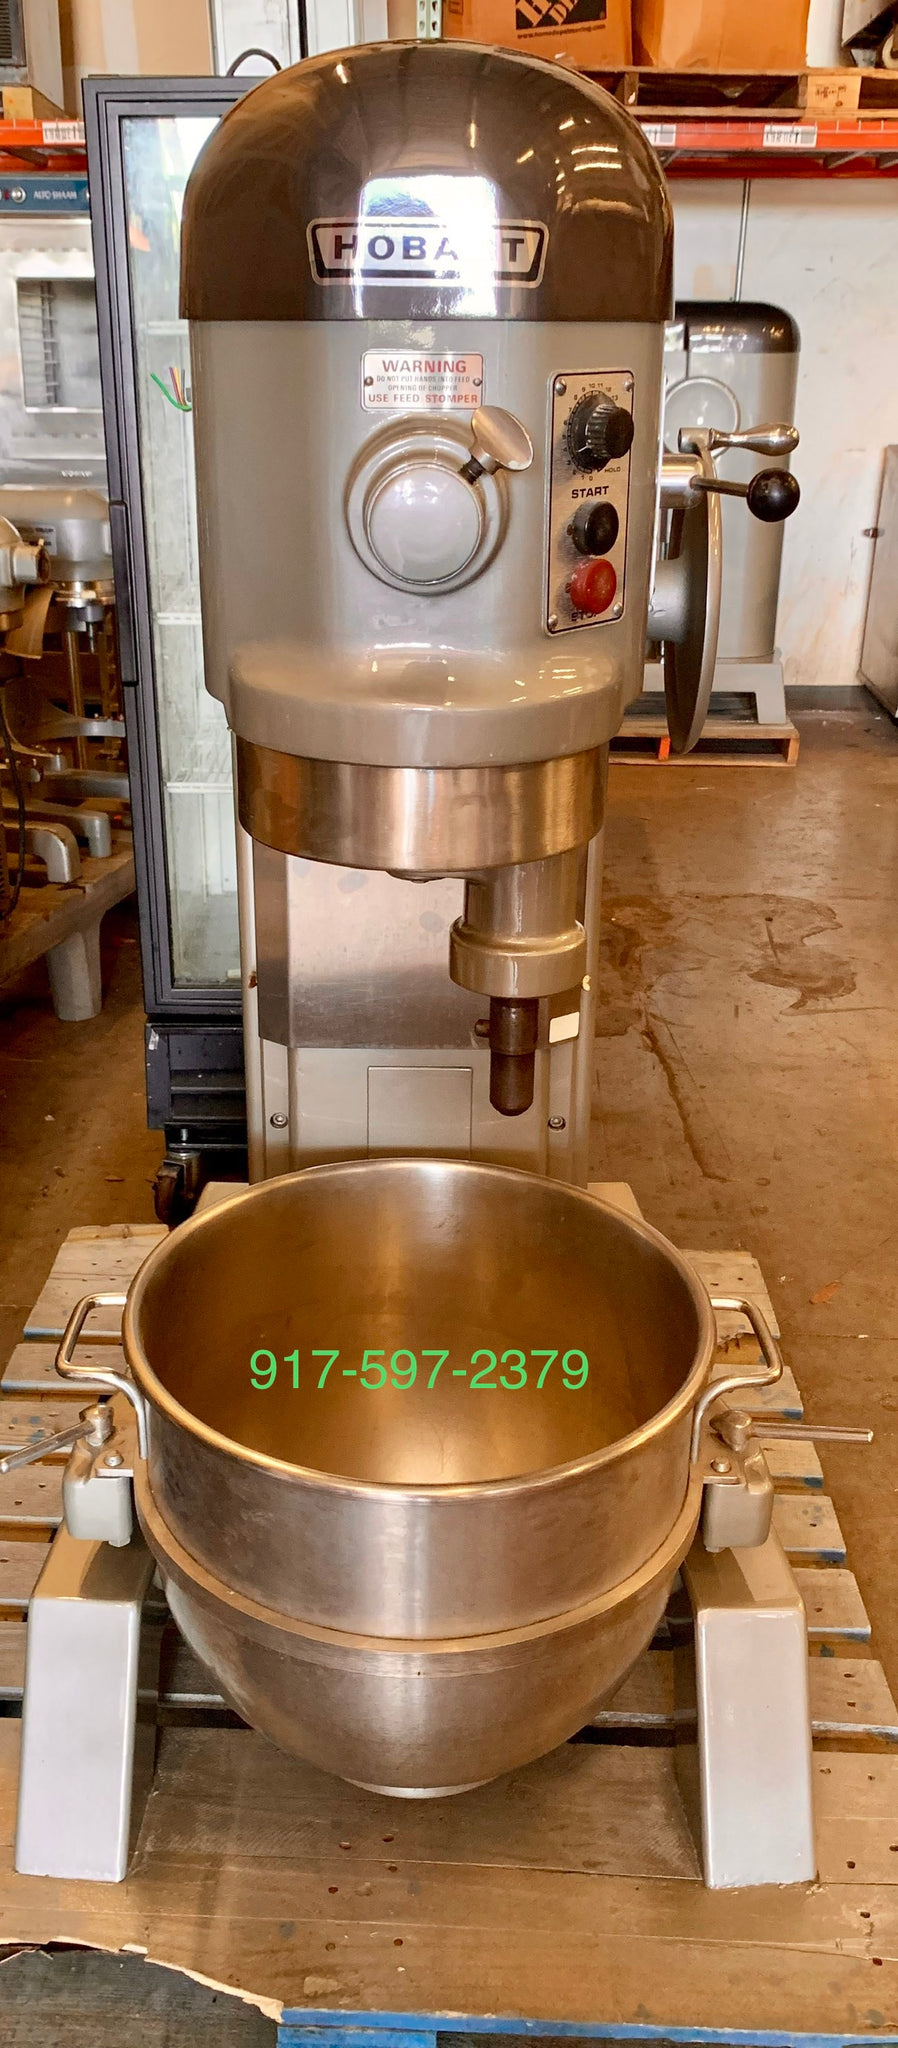 Alstublieft psychologie Serie van Hobart 60 Qt mixer 2 HP 3 phase comes with SS bowl and one attachment —  Palm Beach Restaurant Equipment